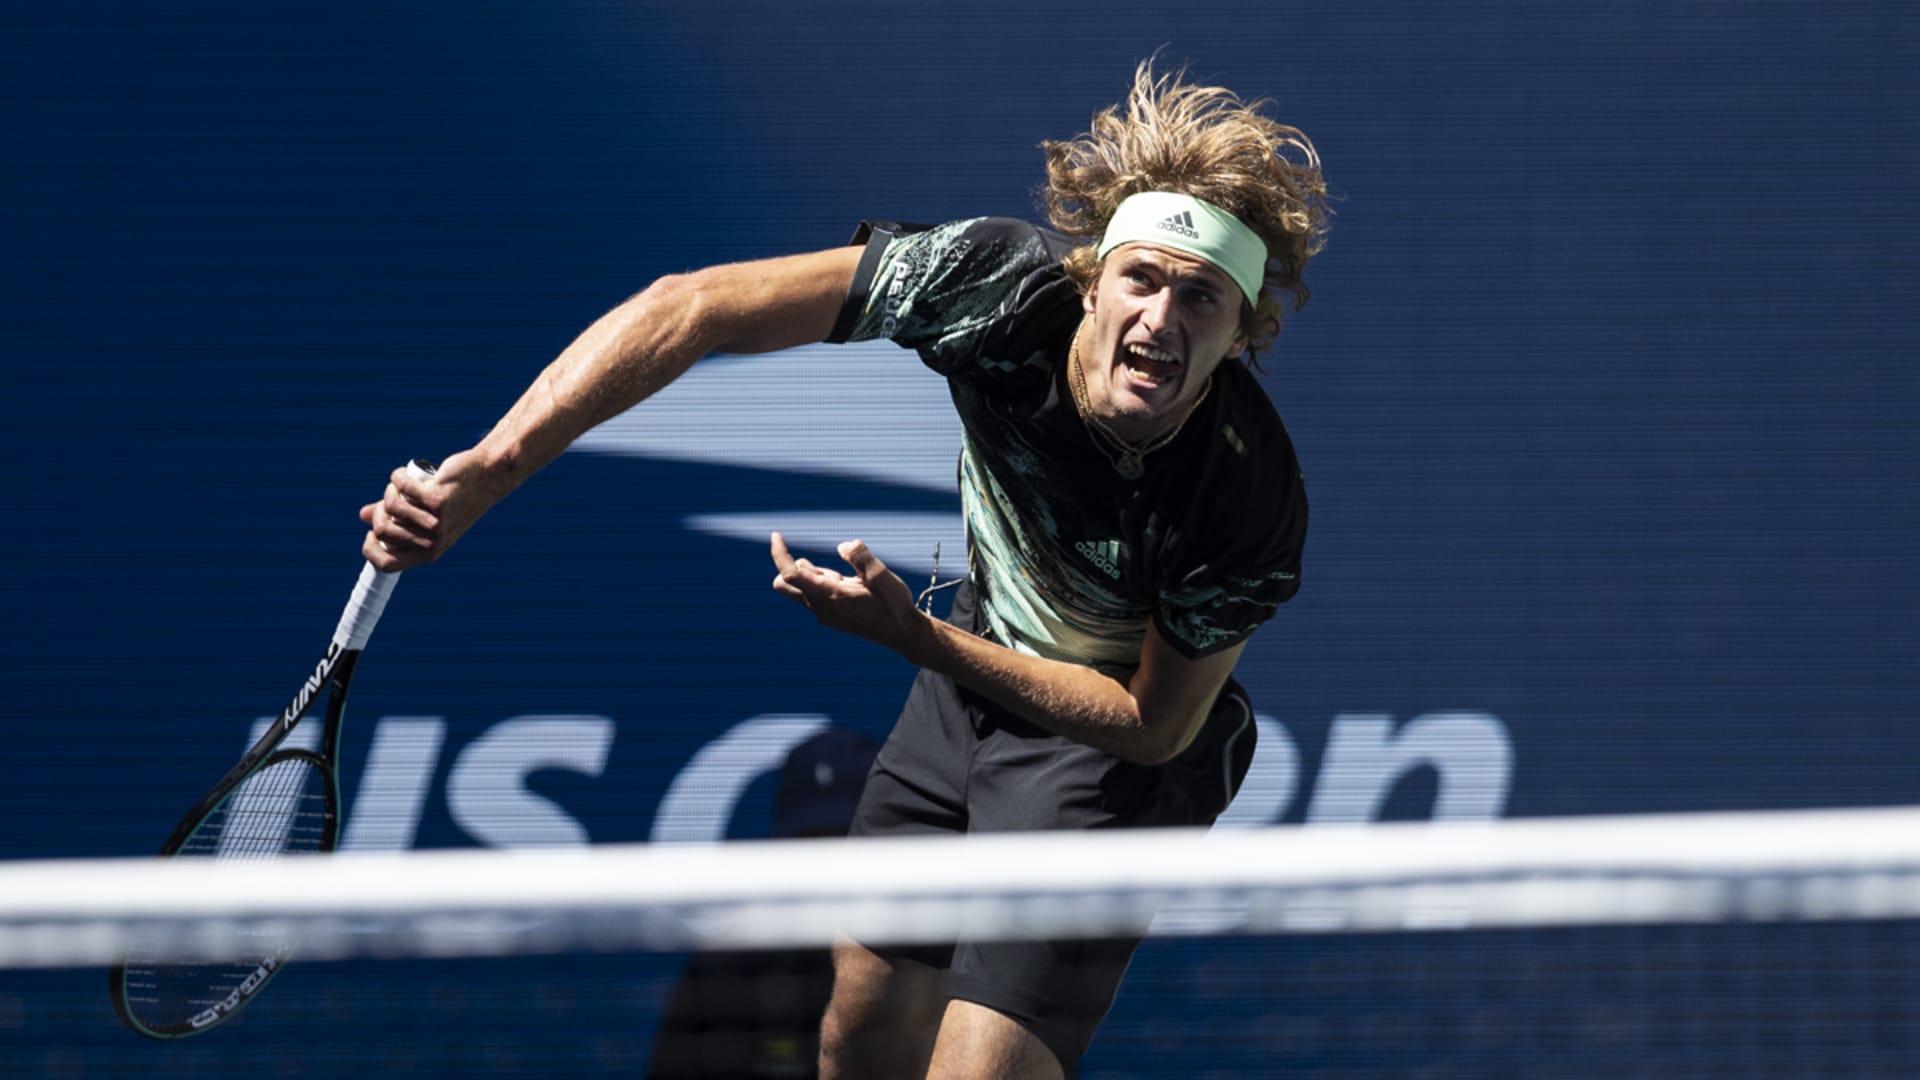 35+ Alexander Zverev New Images And HD Wallpapers - SportsGalleries.Net